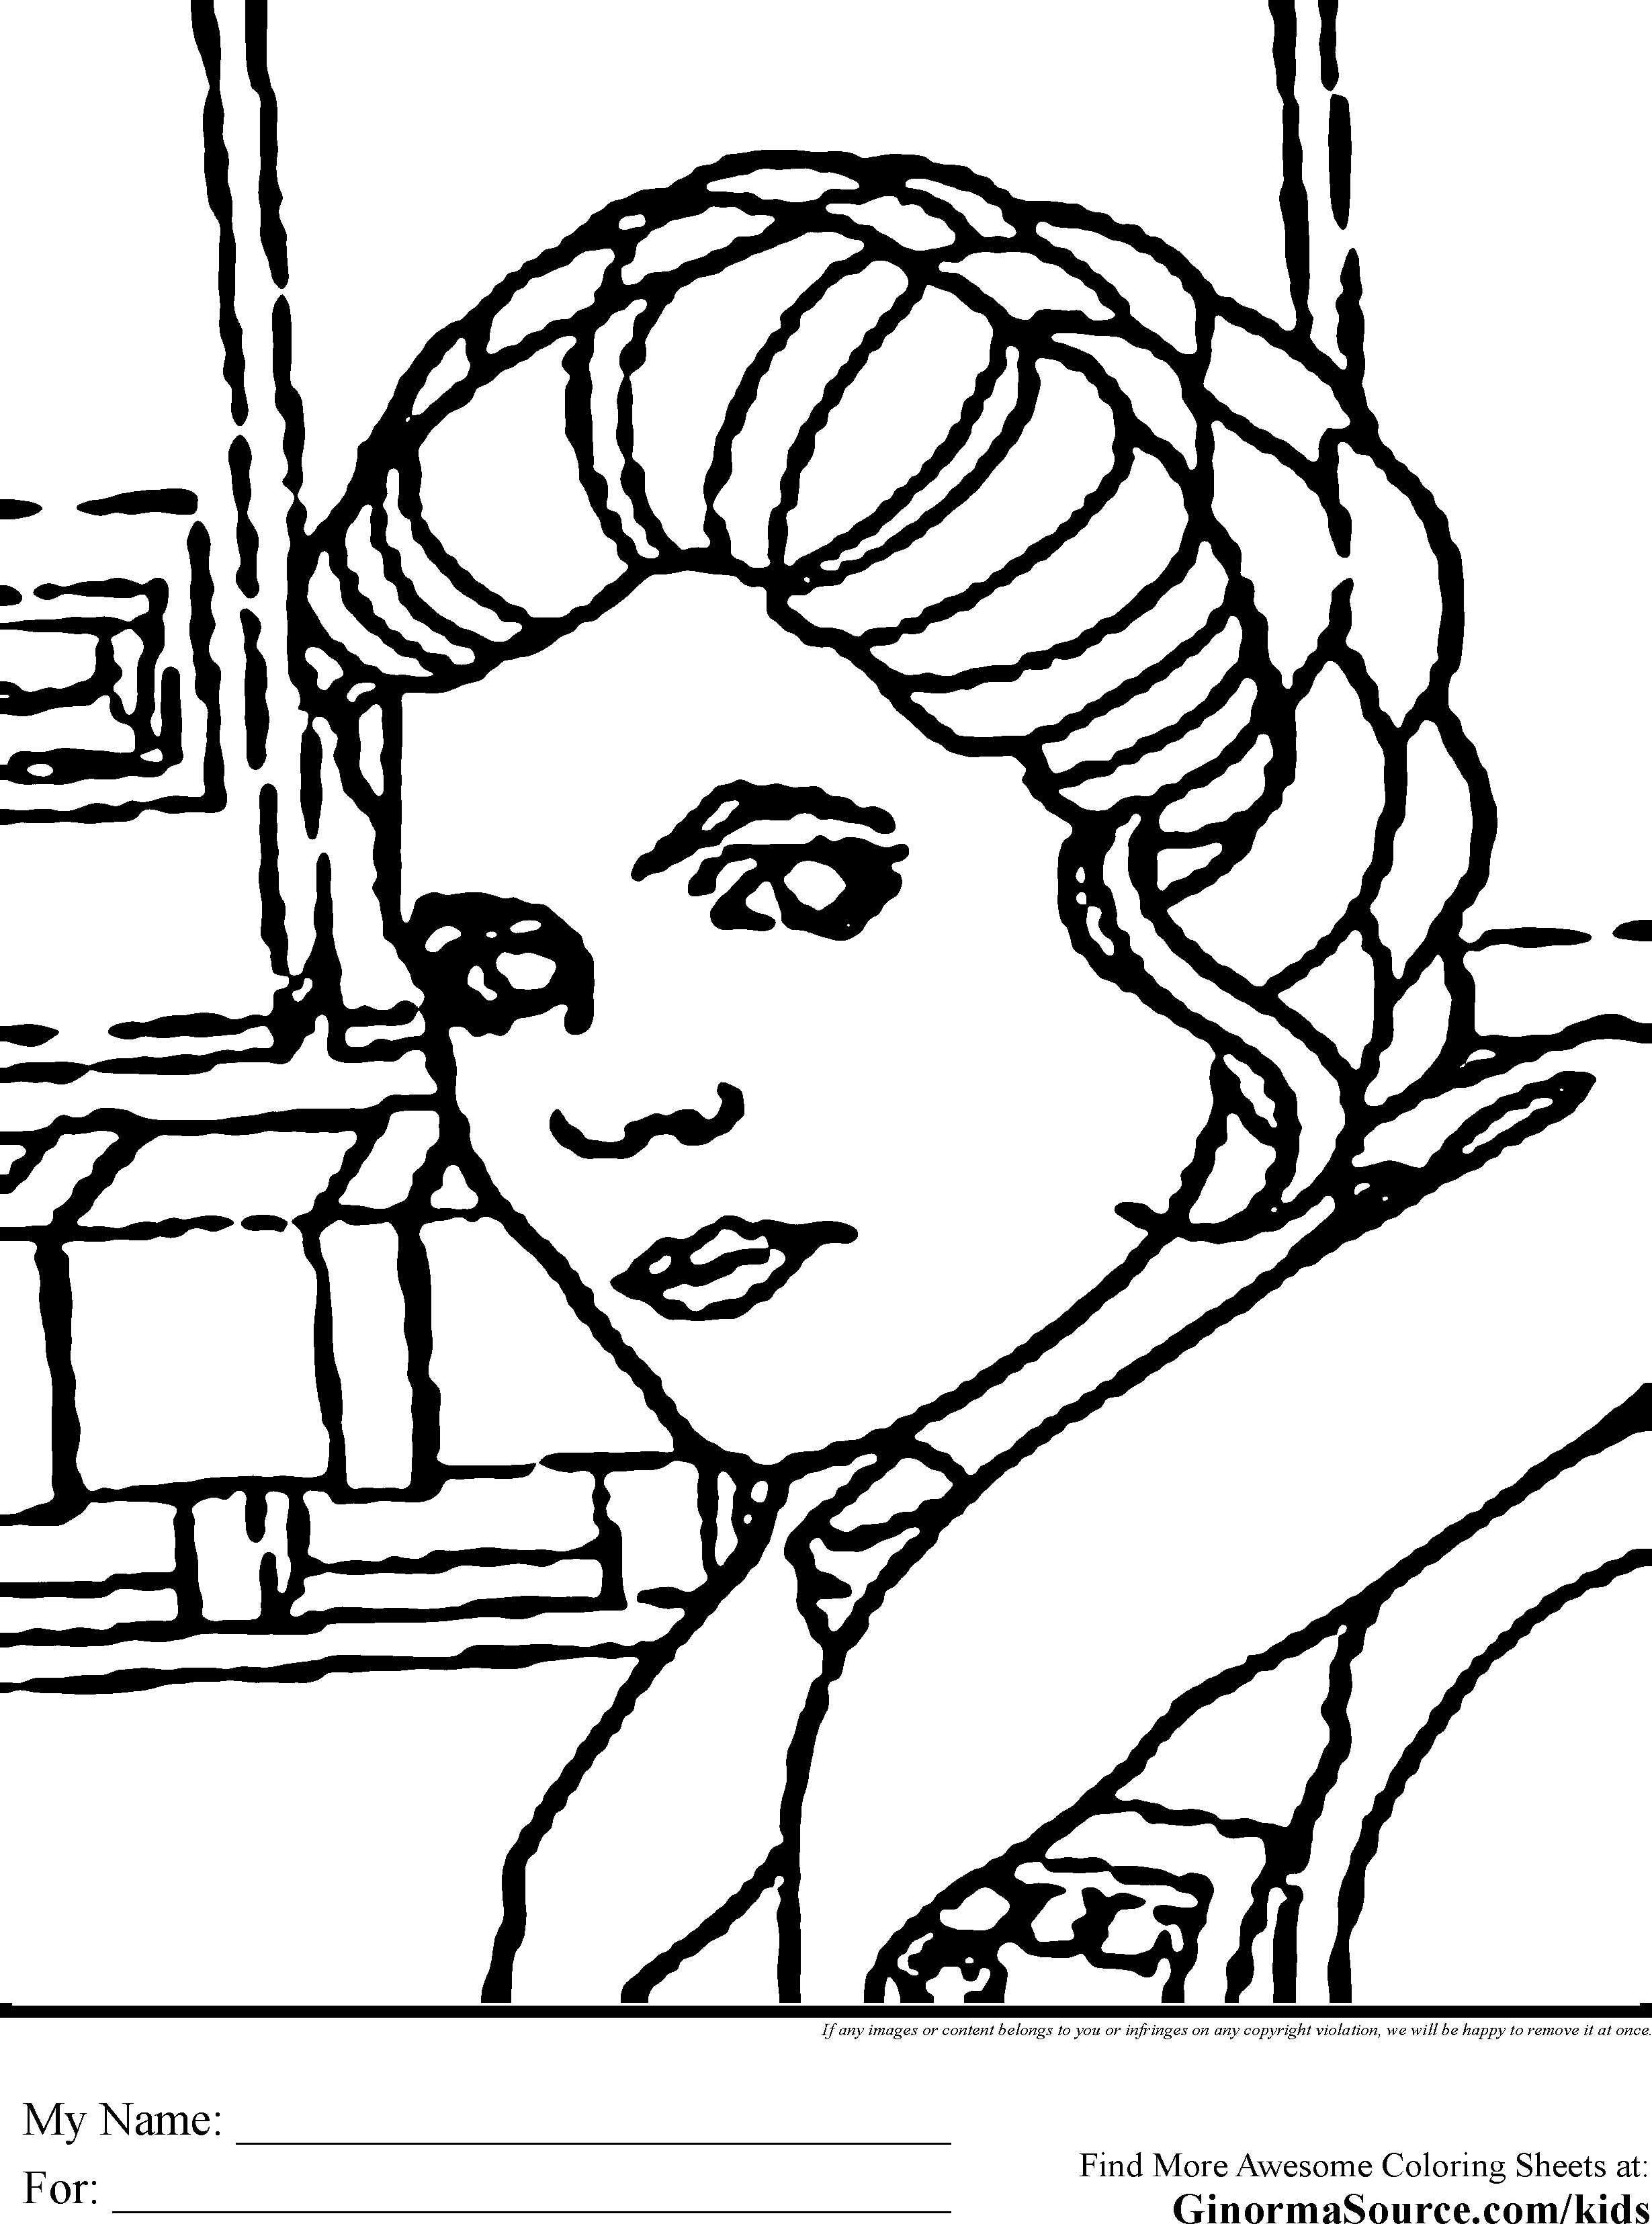 Princess Leia Coloring Page - Coloring Home